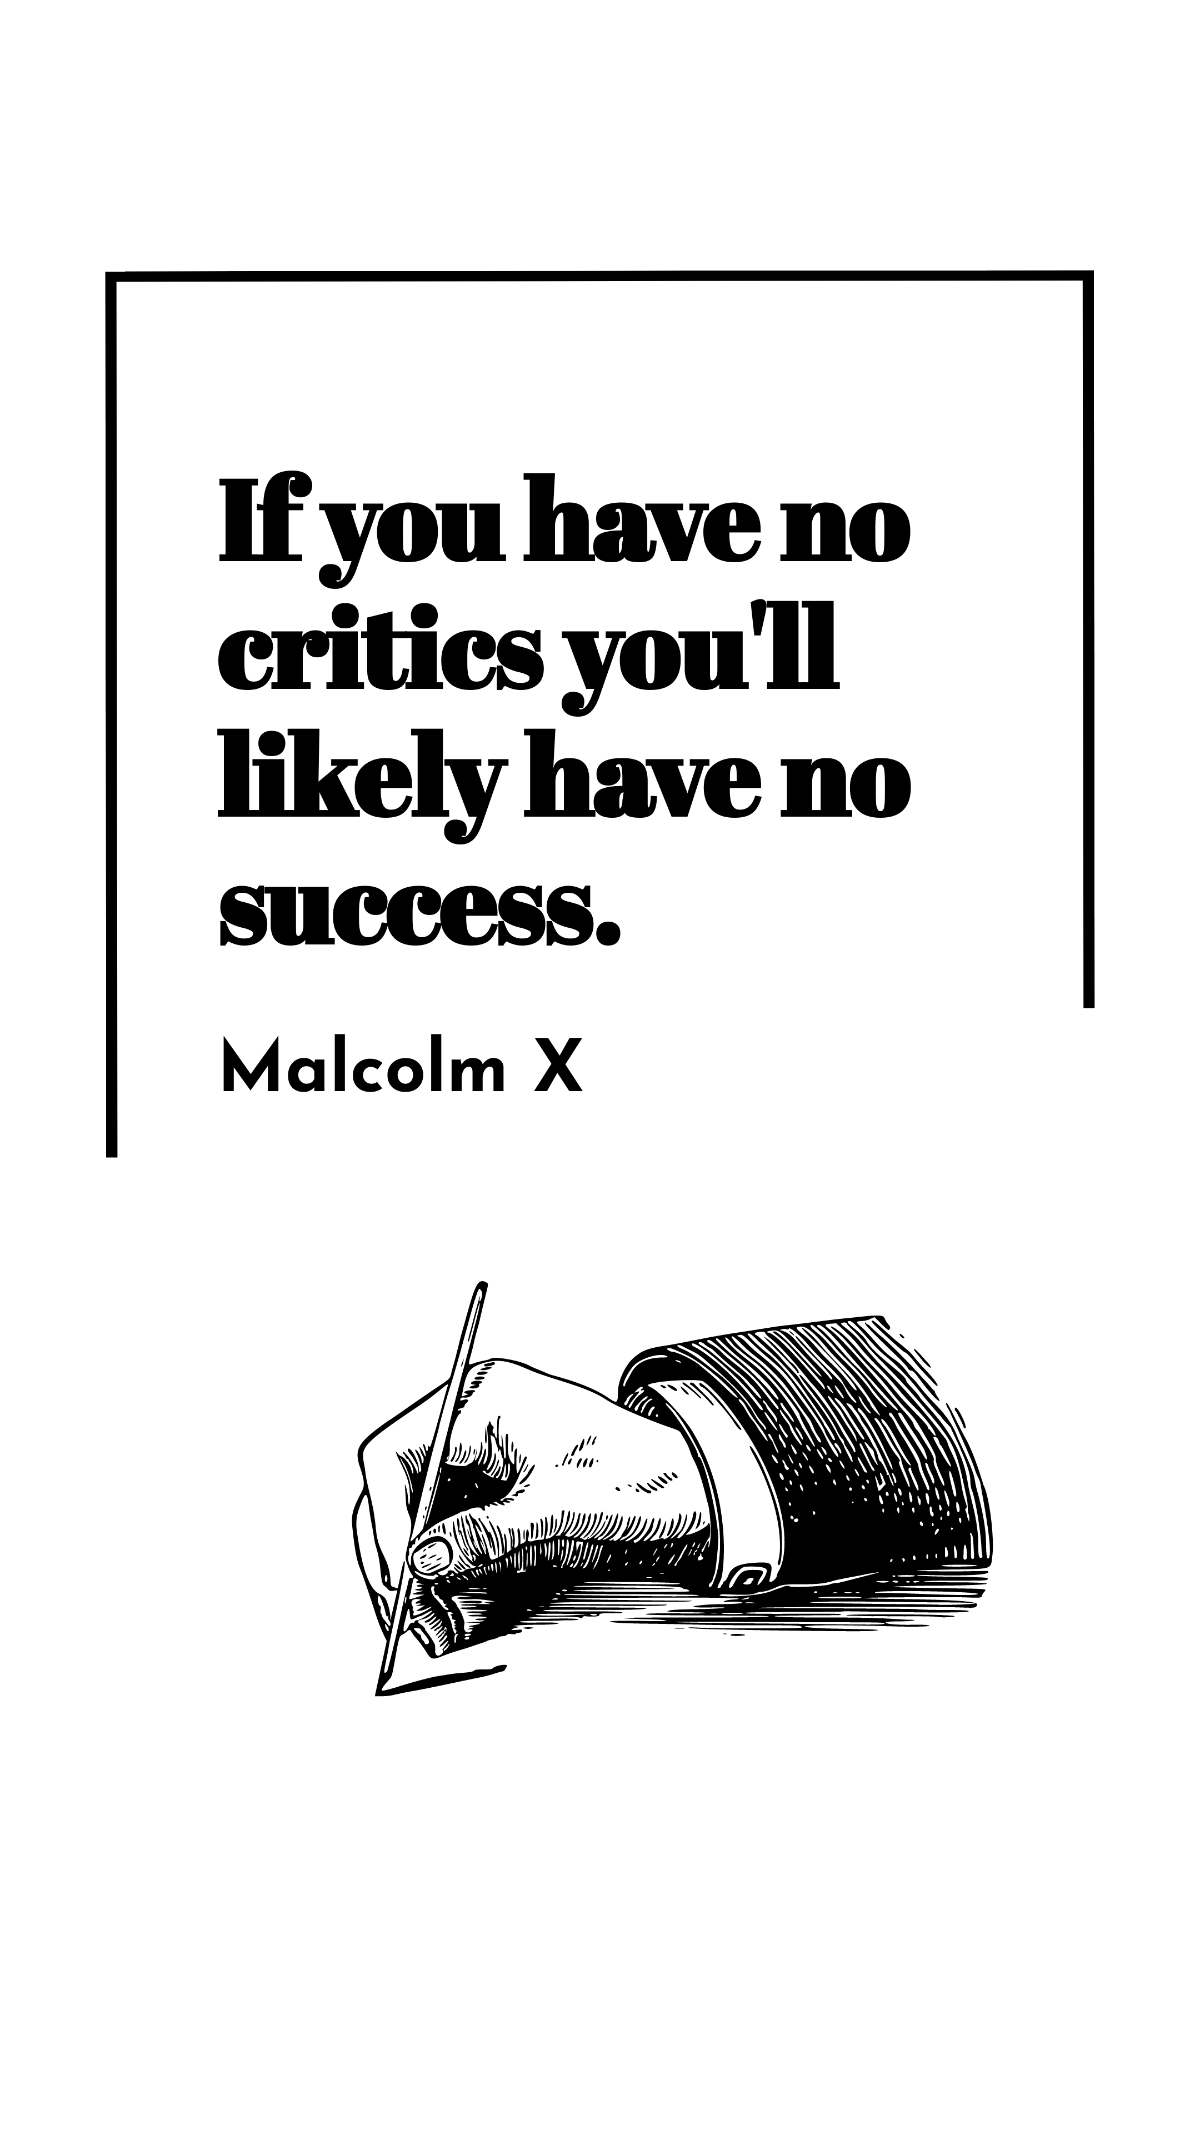 Malcolm X - If you have no critics you'll likely have no success. Template